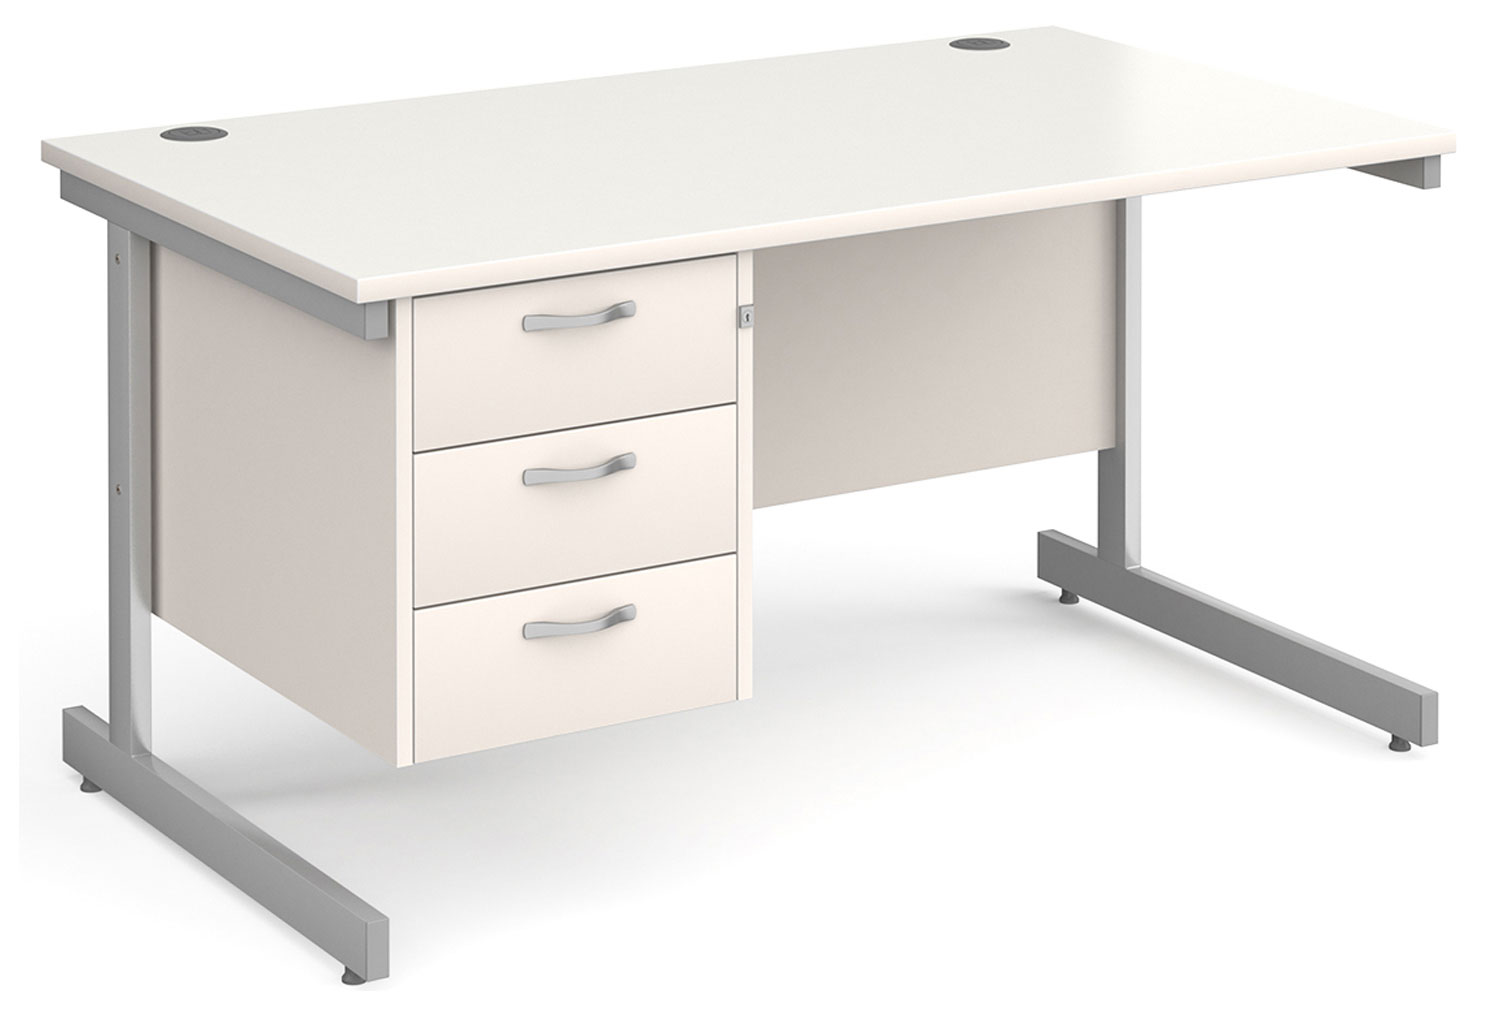 All White C-Leg Clerical Office Desk 3 Drawer, 140wx80dx73h (cm), Express Delivery